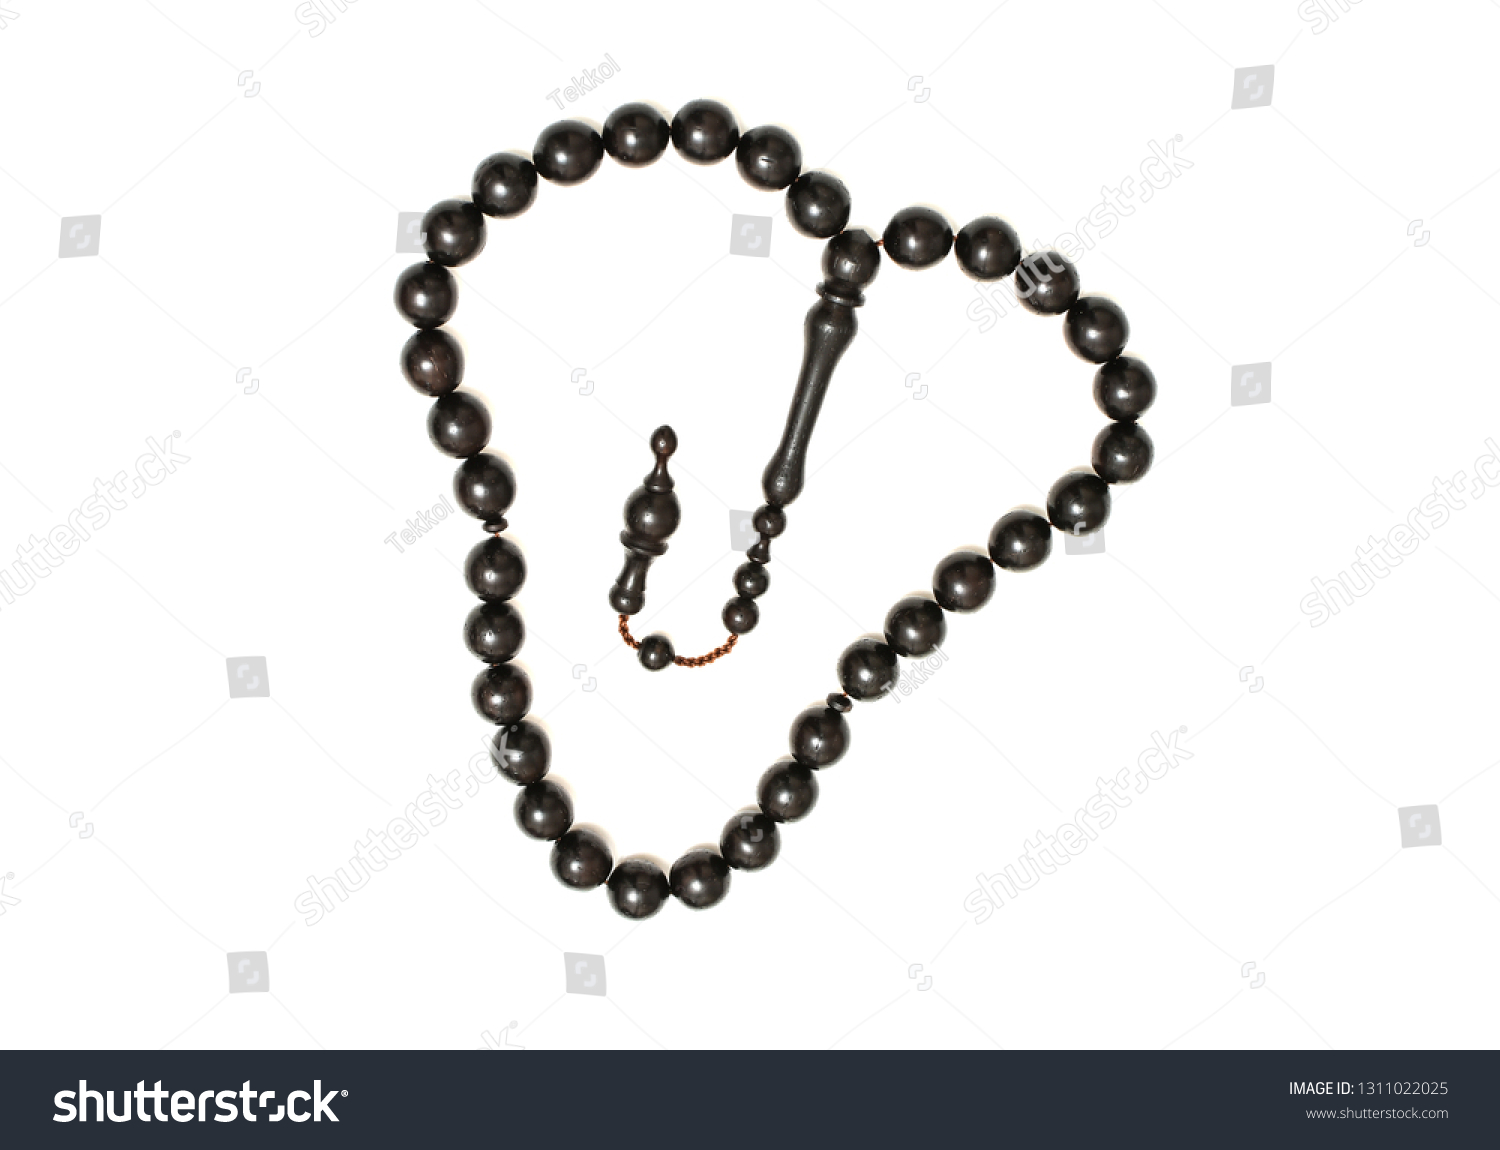 Heart shape of Muslim wooden prayer beads (rosary beads) isolated on white background. #1311022025